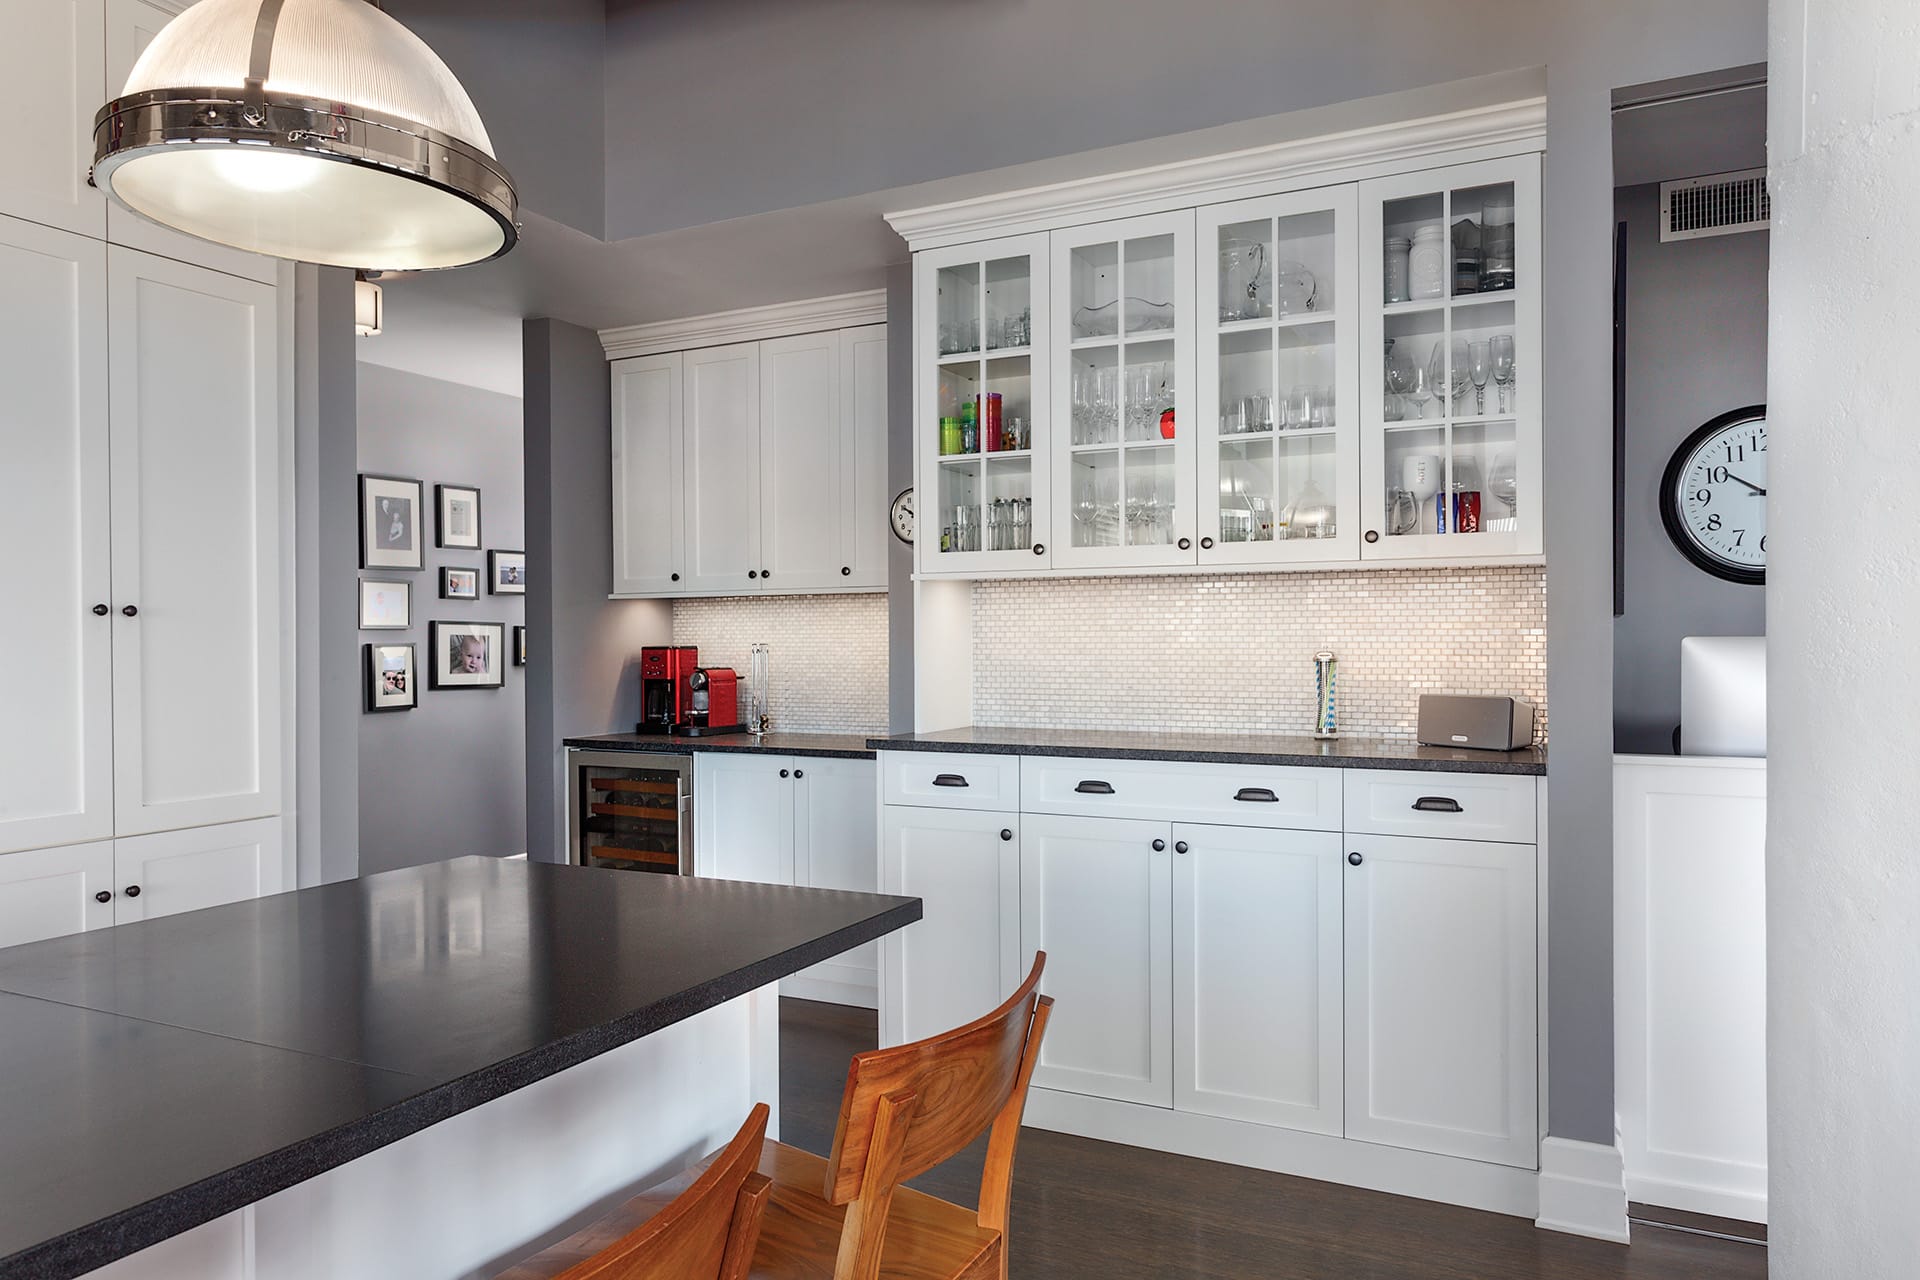 Bar area in a kitchen with white cabinetry, mosaic tile backsplash, and grey painted walls